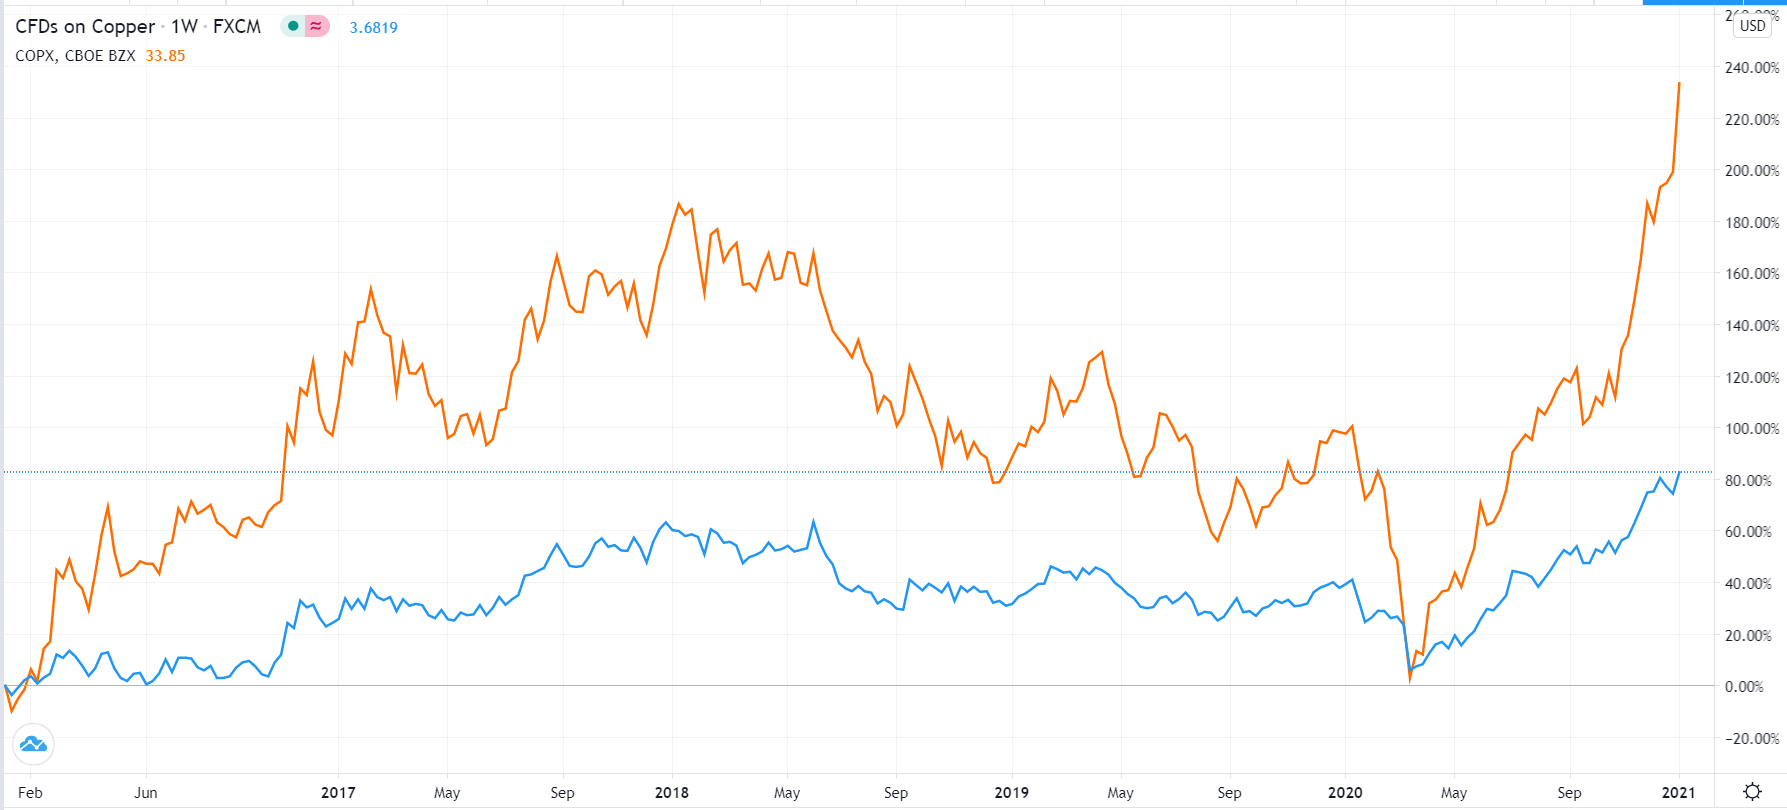 The copper ETF has outperformed copper.